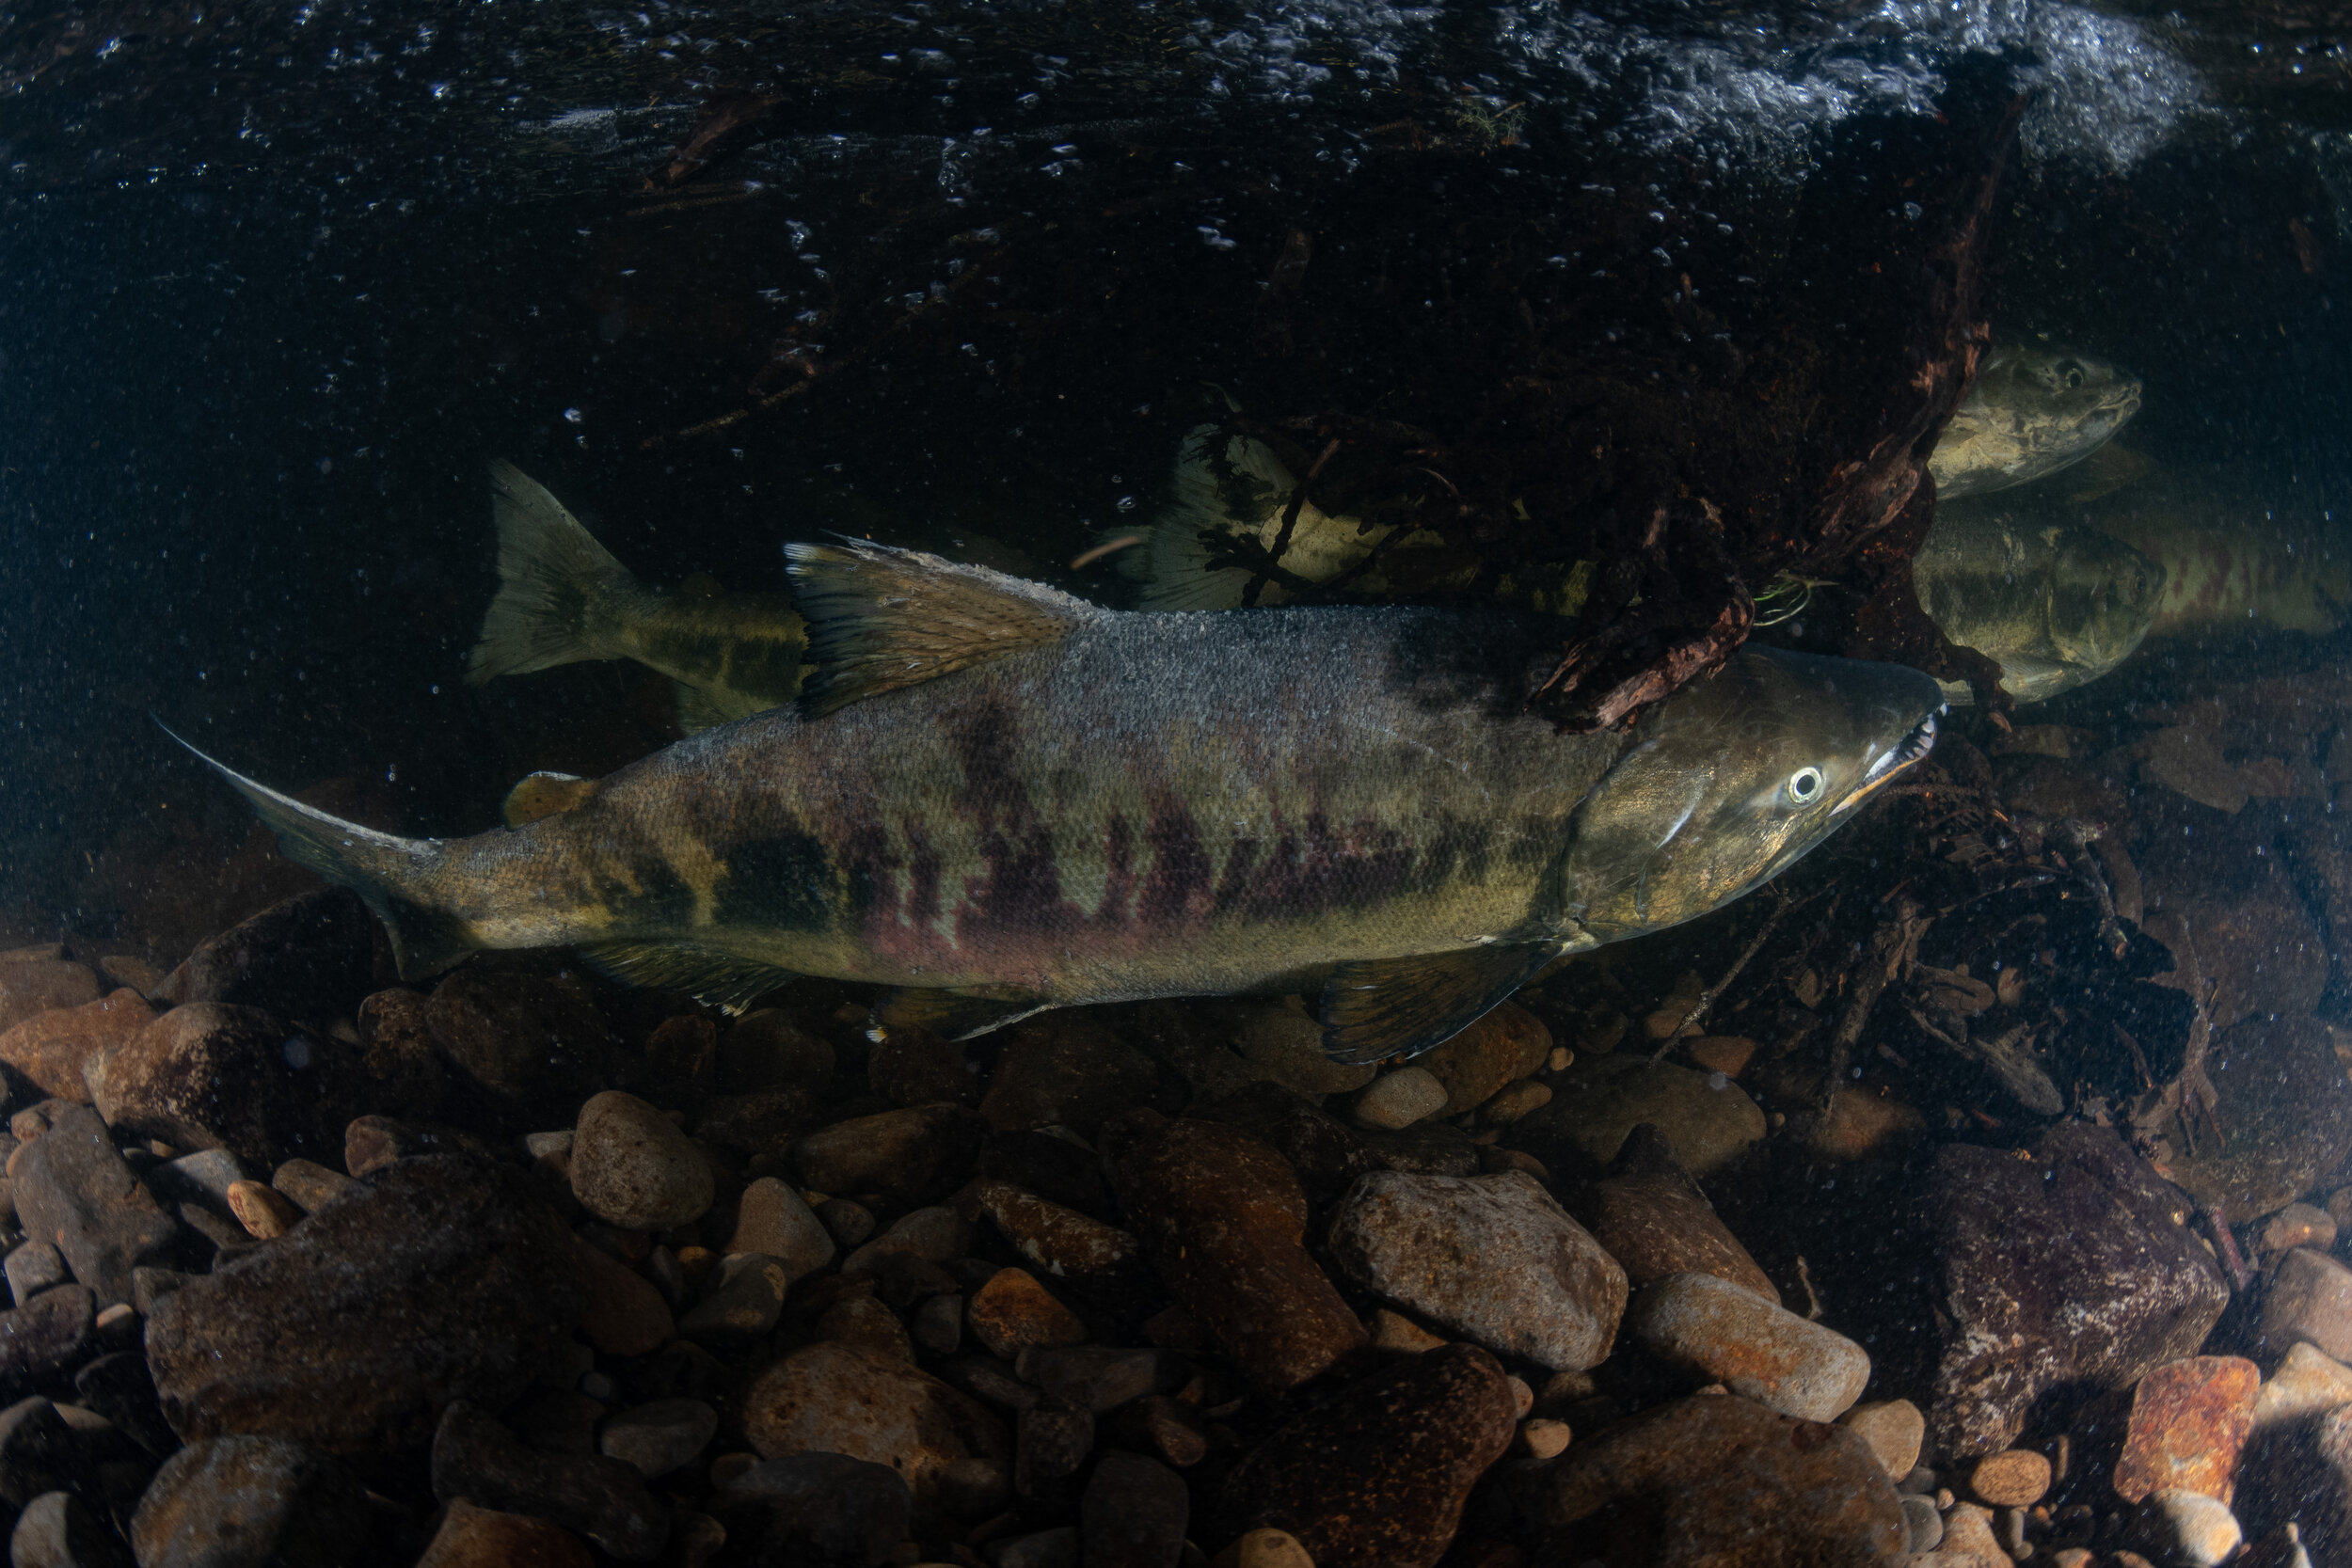 Chum salmon by Laura Tesler